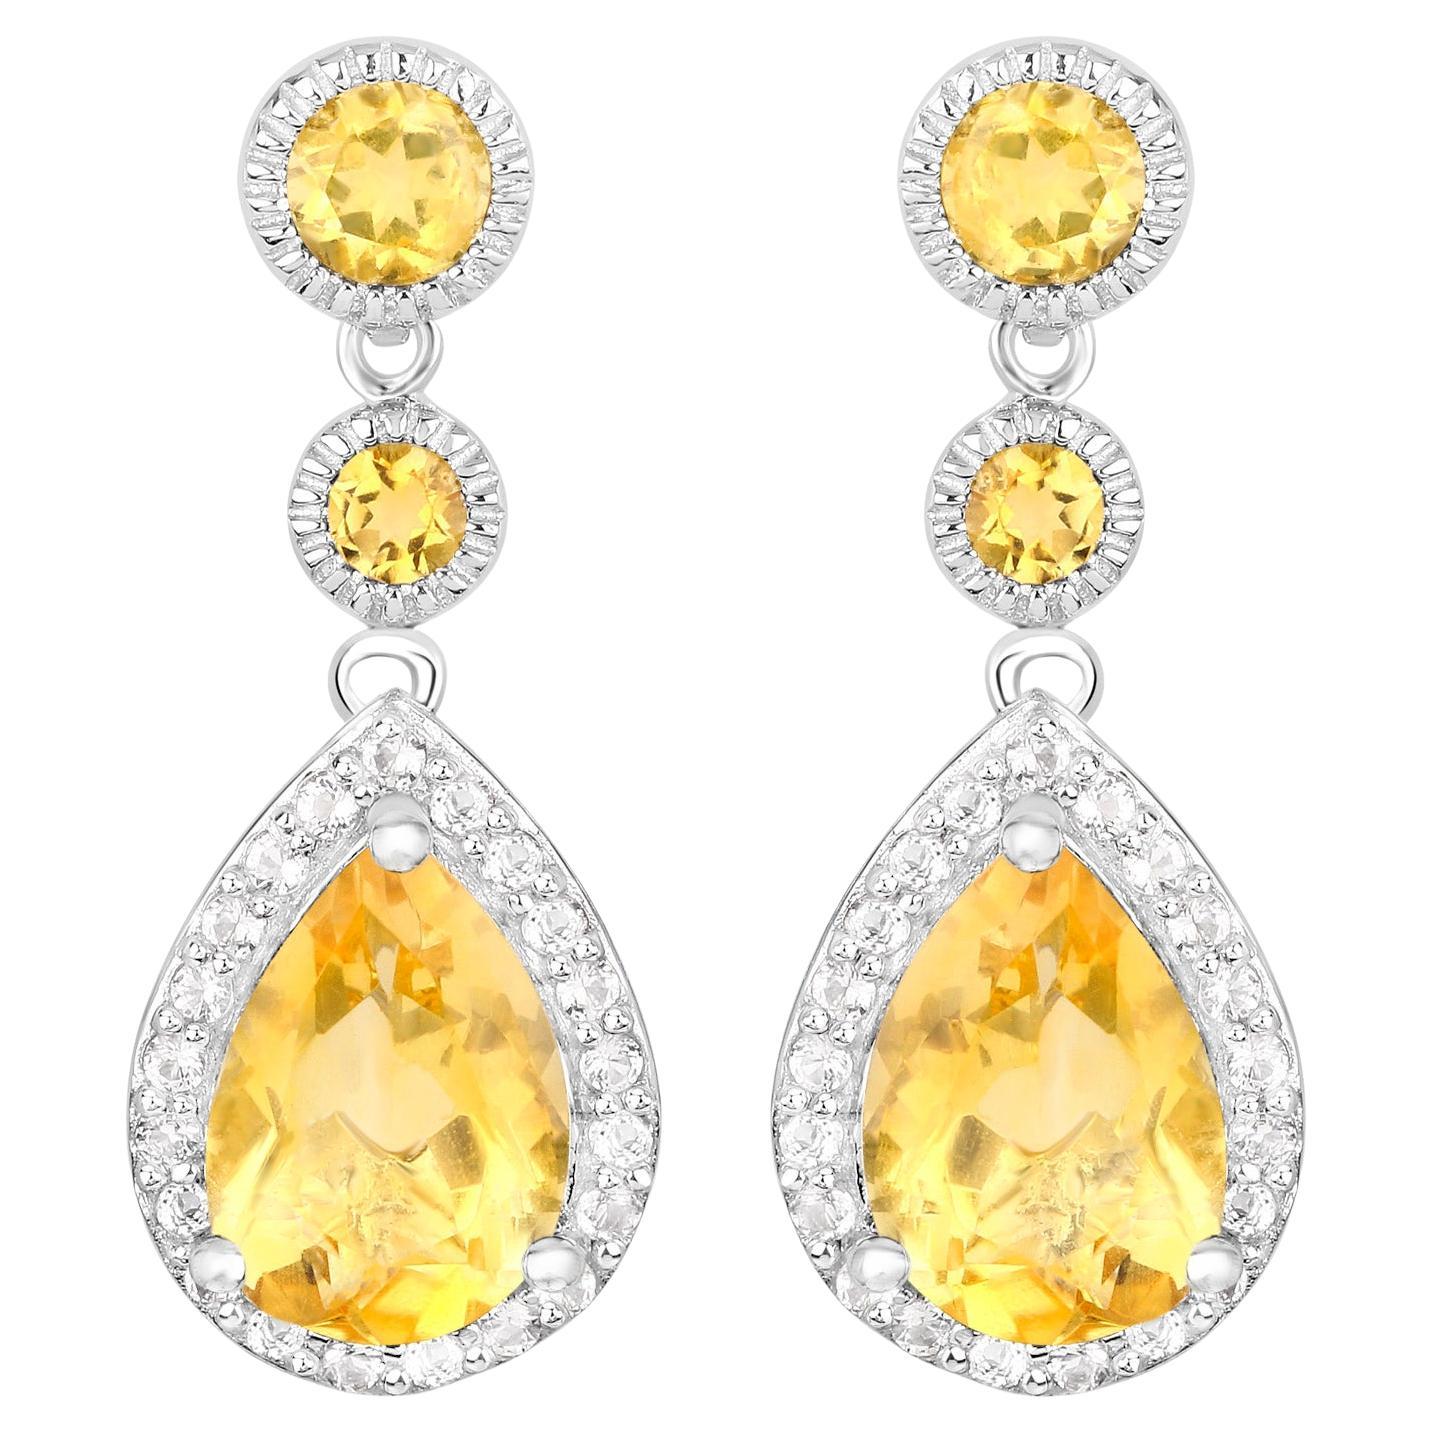 Citrine Earrings With White Topazes 7.06 Carats Rhodium Plated Sterling Silver